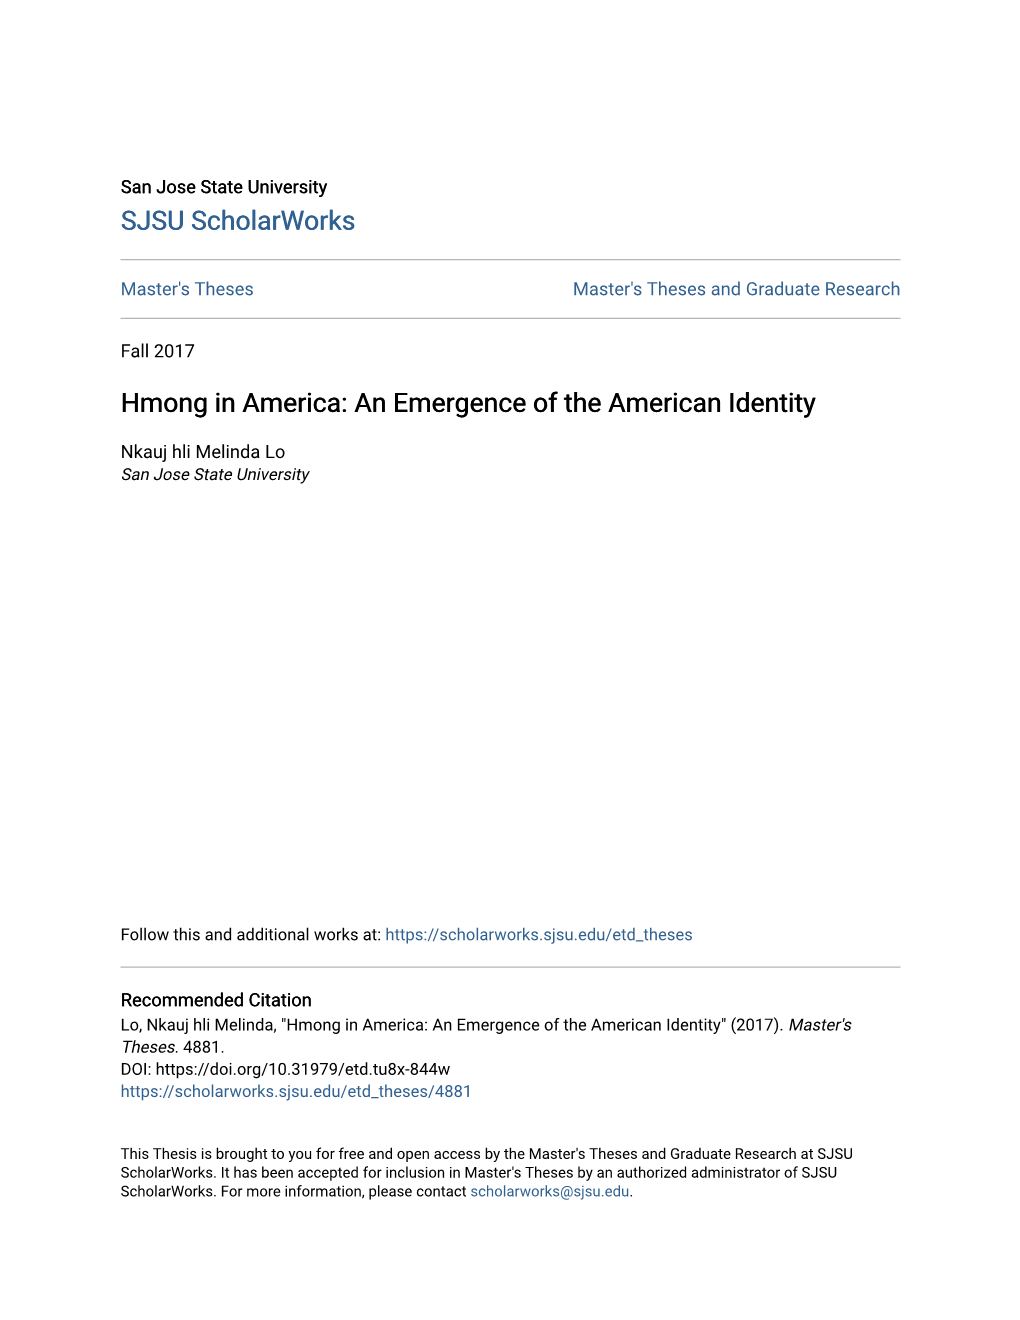 Hmong in America: an Emergence of the American Identity